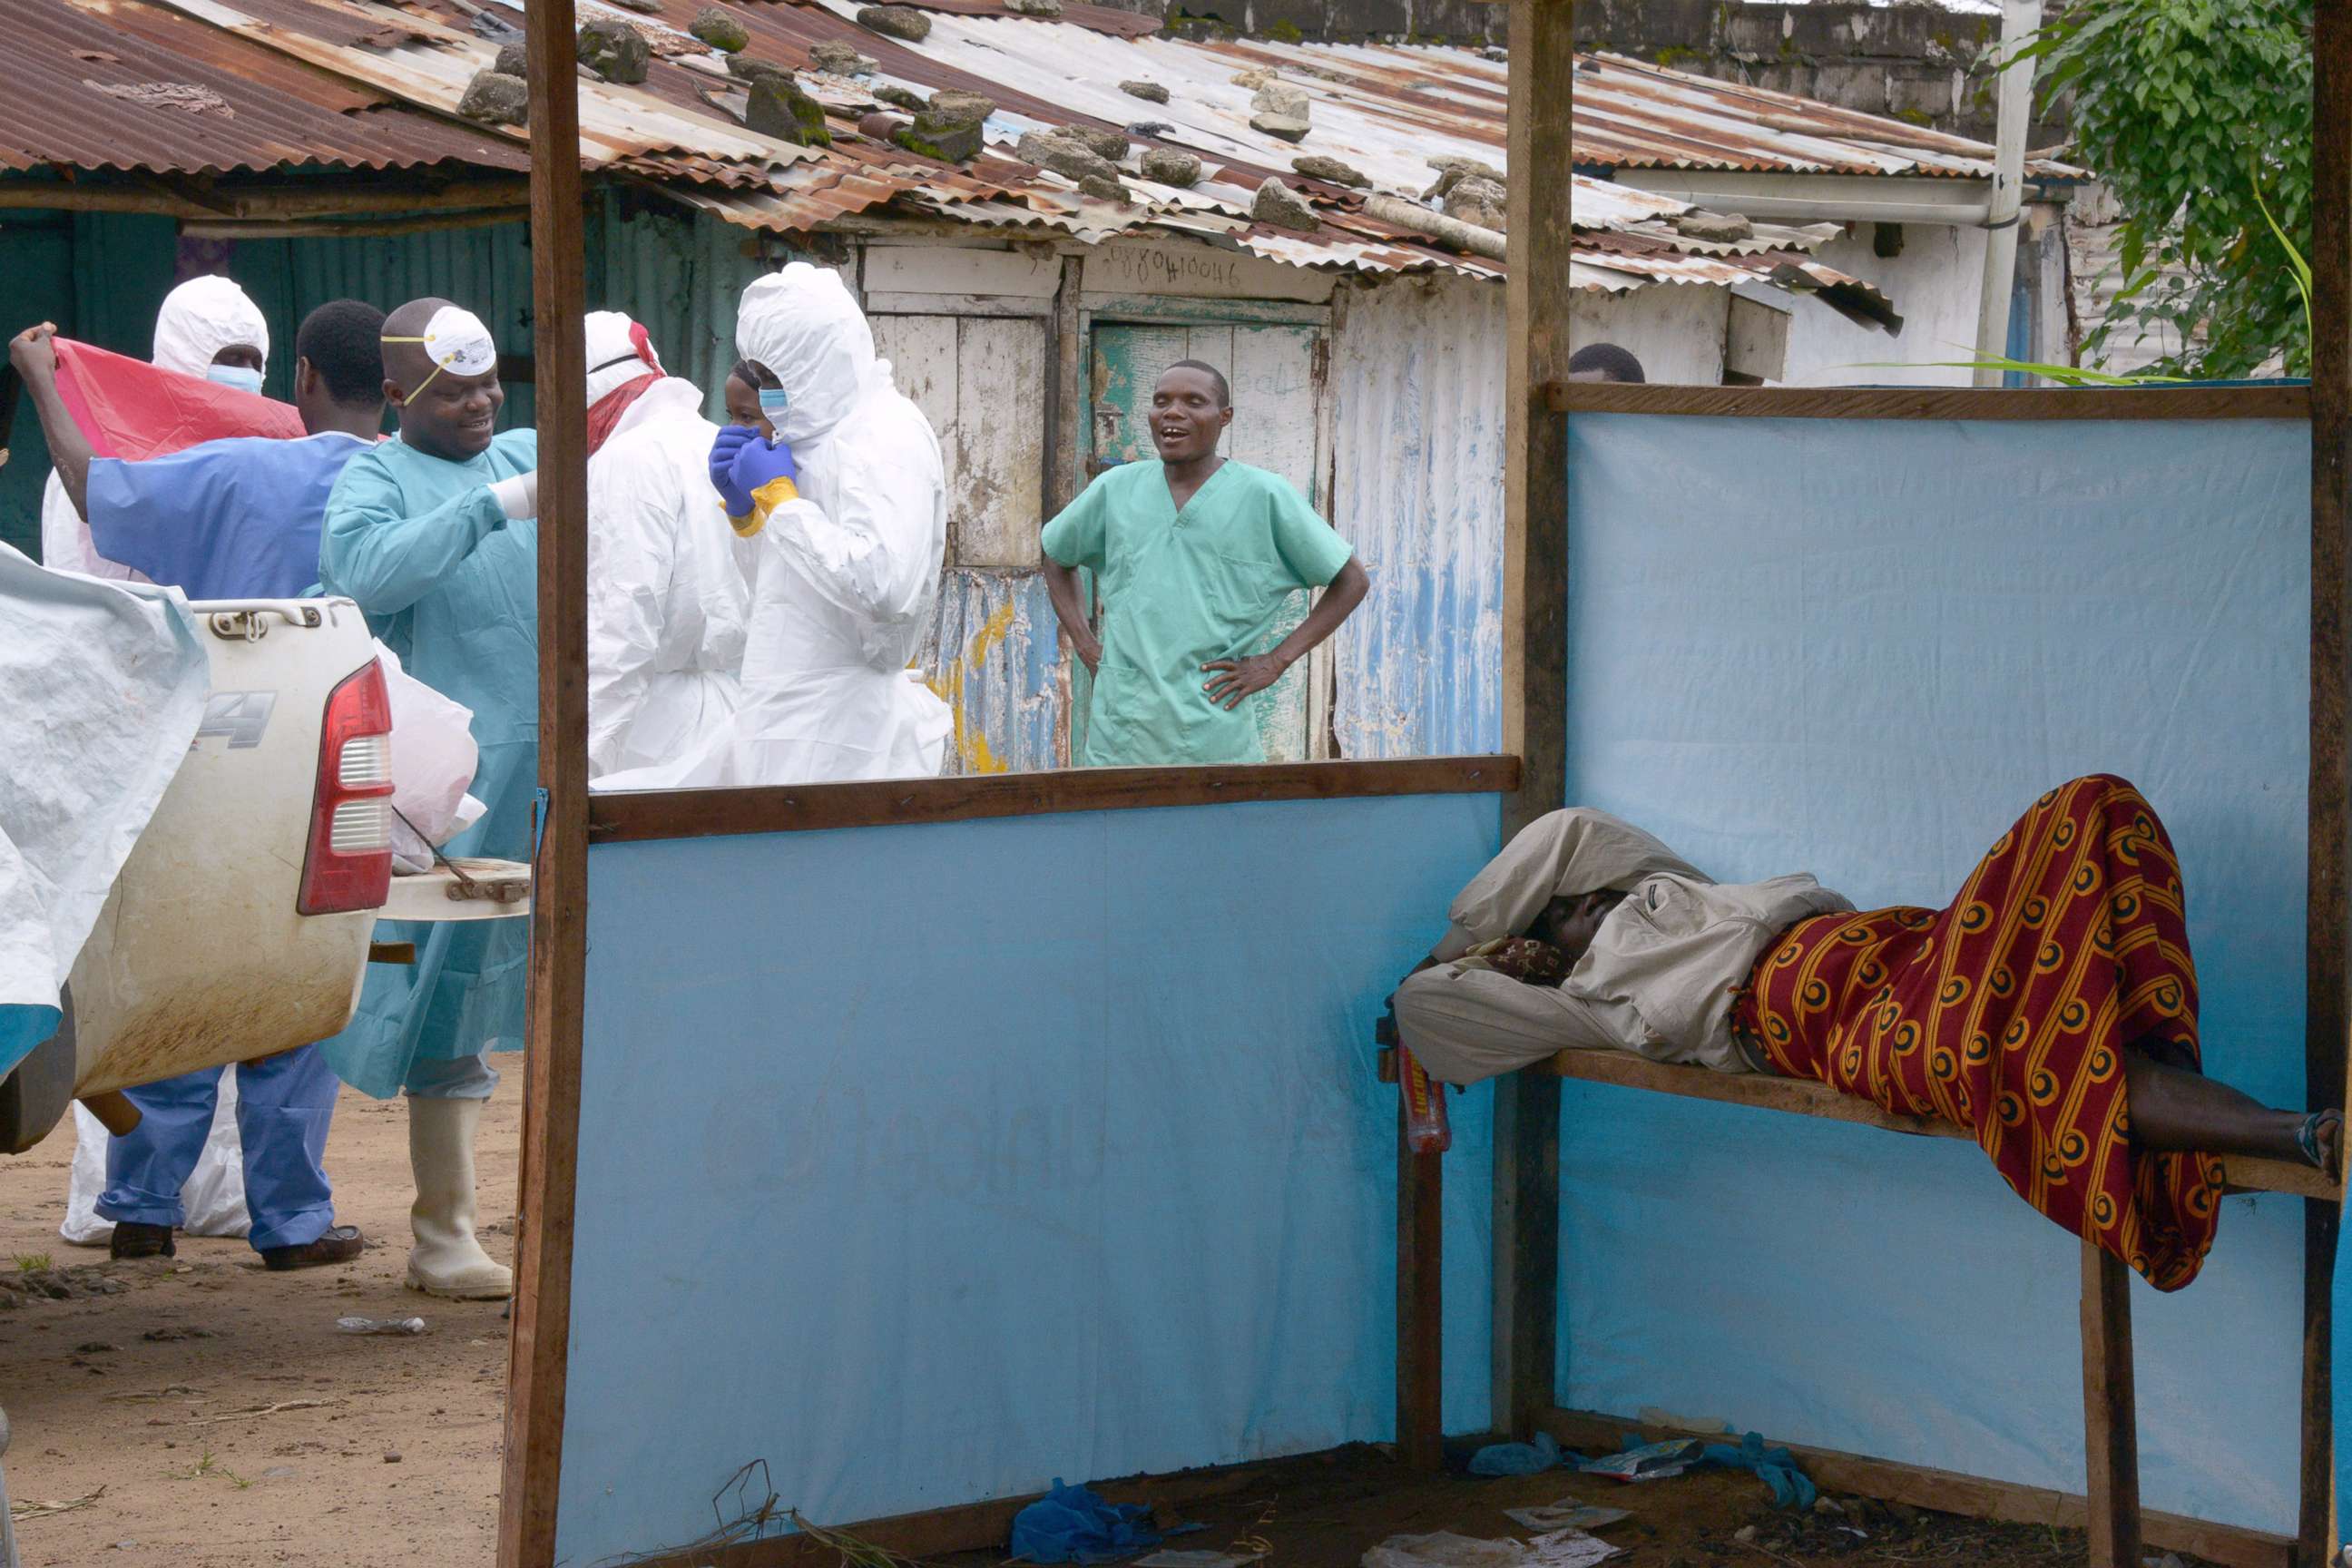 PHOTO: Medical workers of the John Fitzgerald Kennedy hospital in Monrovia, responsible for transport of the bodies of Ebola virus victims, wear their protective suits as they walk past a sick woman waiting for assistance, on Sept. 6, 2014.